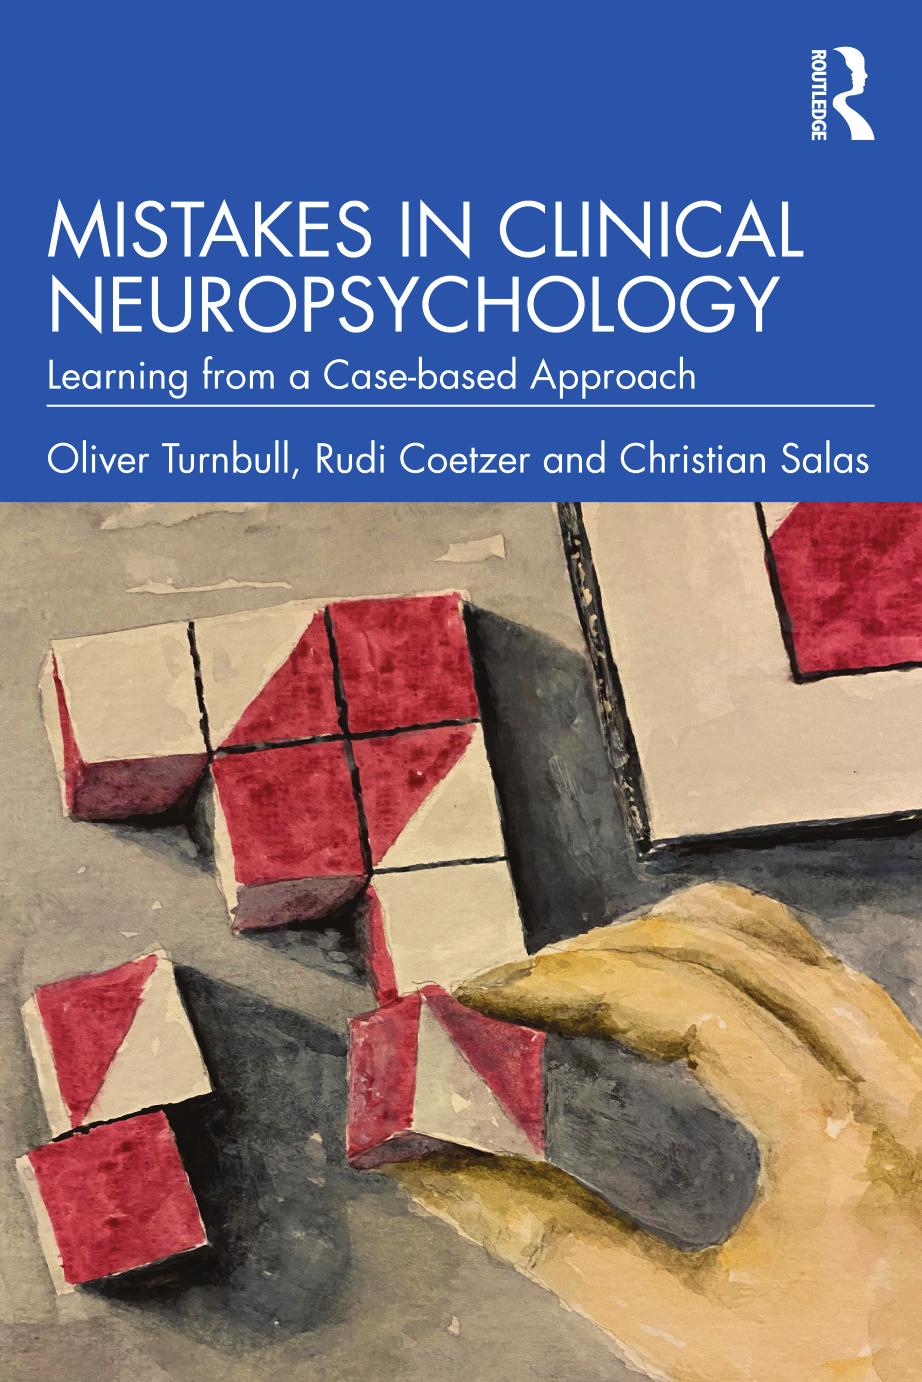 Mistakes in Clinical Neuropsychology: Learning from a Case-based Approach by Oliver Turnbull Rudi Coetzer Christian Salas